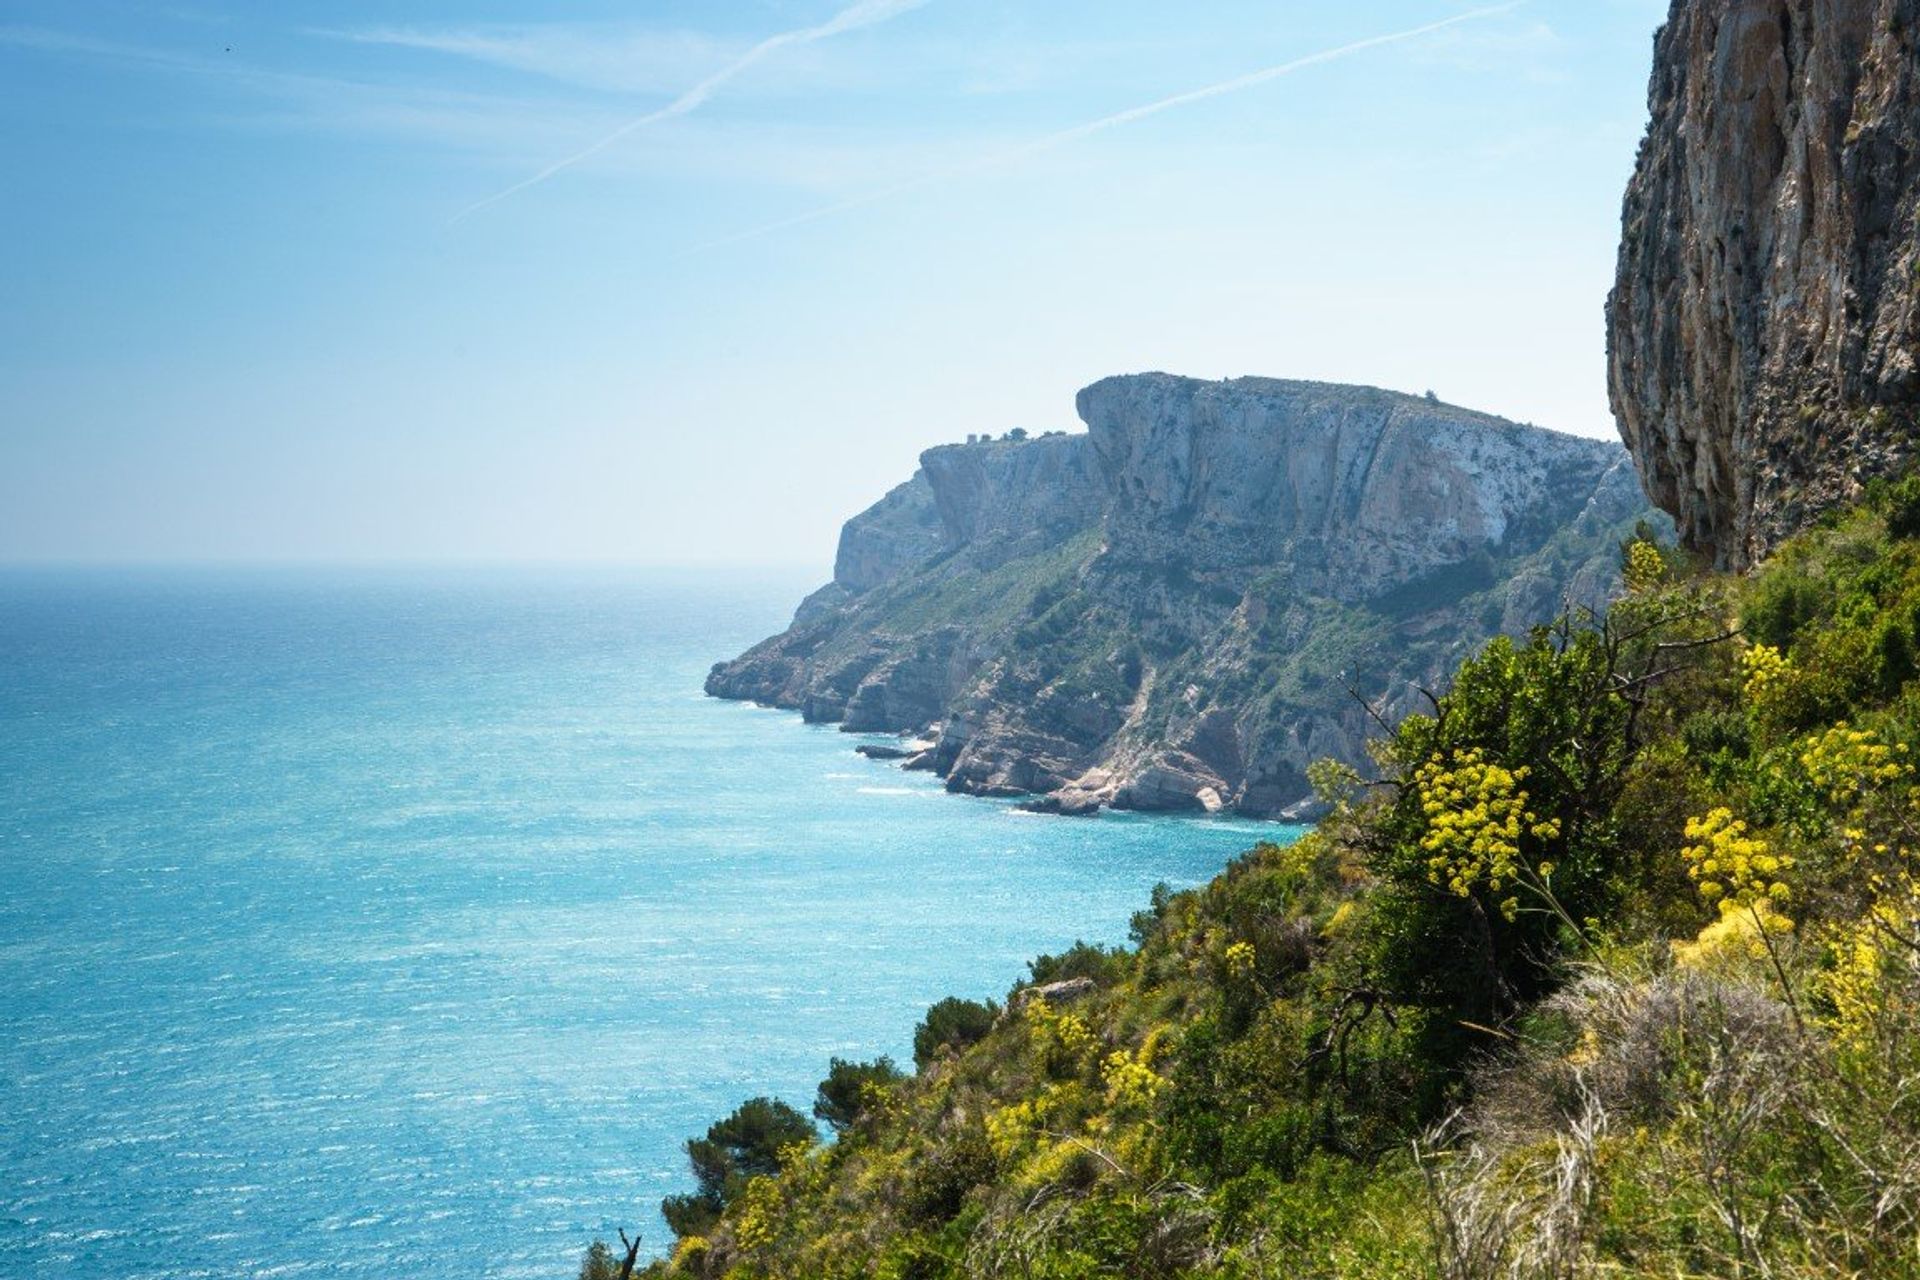 Benitachell is home to one of the most beautiful stretches of unspoiled coastline in Spain